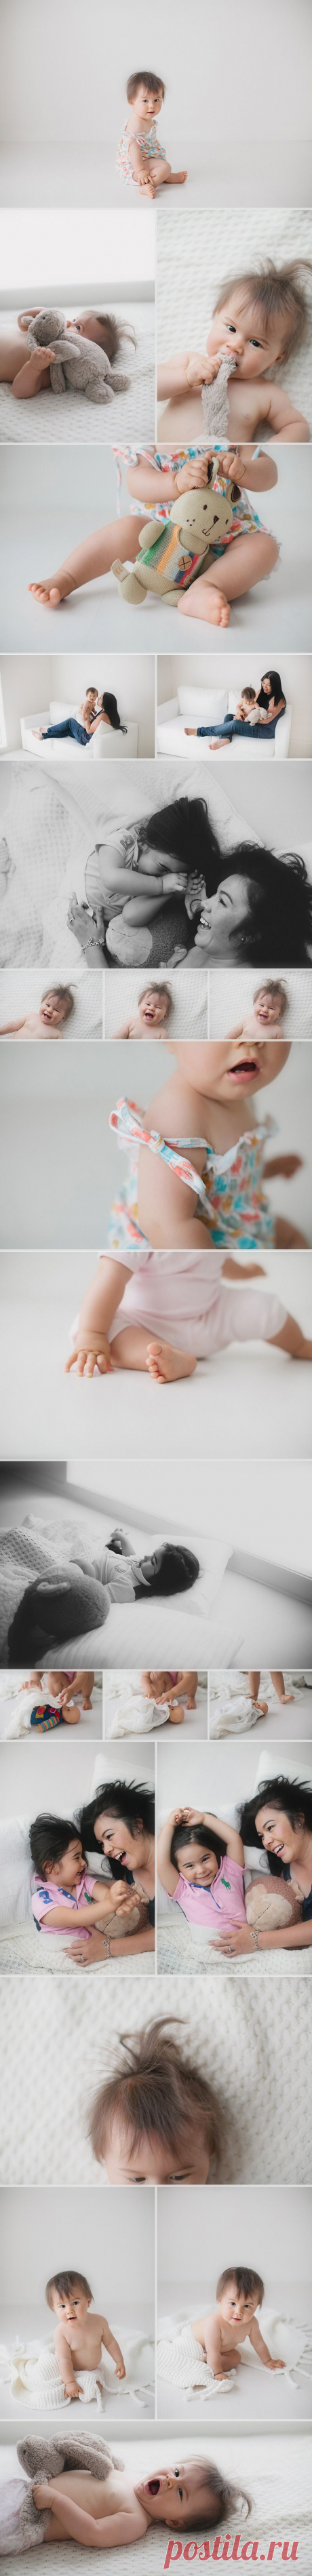 Little friend | Baby photography, Melbourne | Newborn, Baby and Wedding Photography in Melbourne :: Kristen Cook | Blog